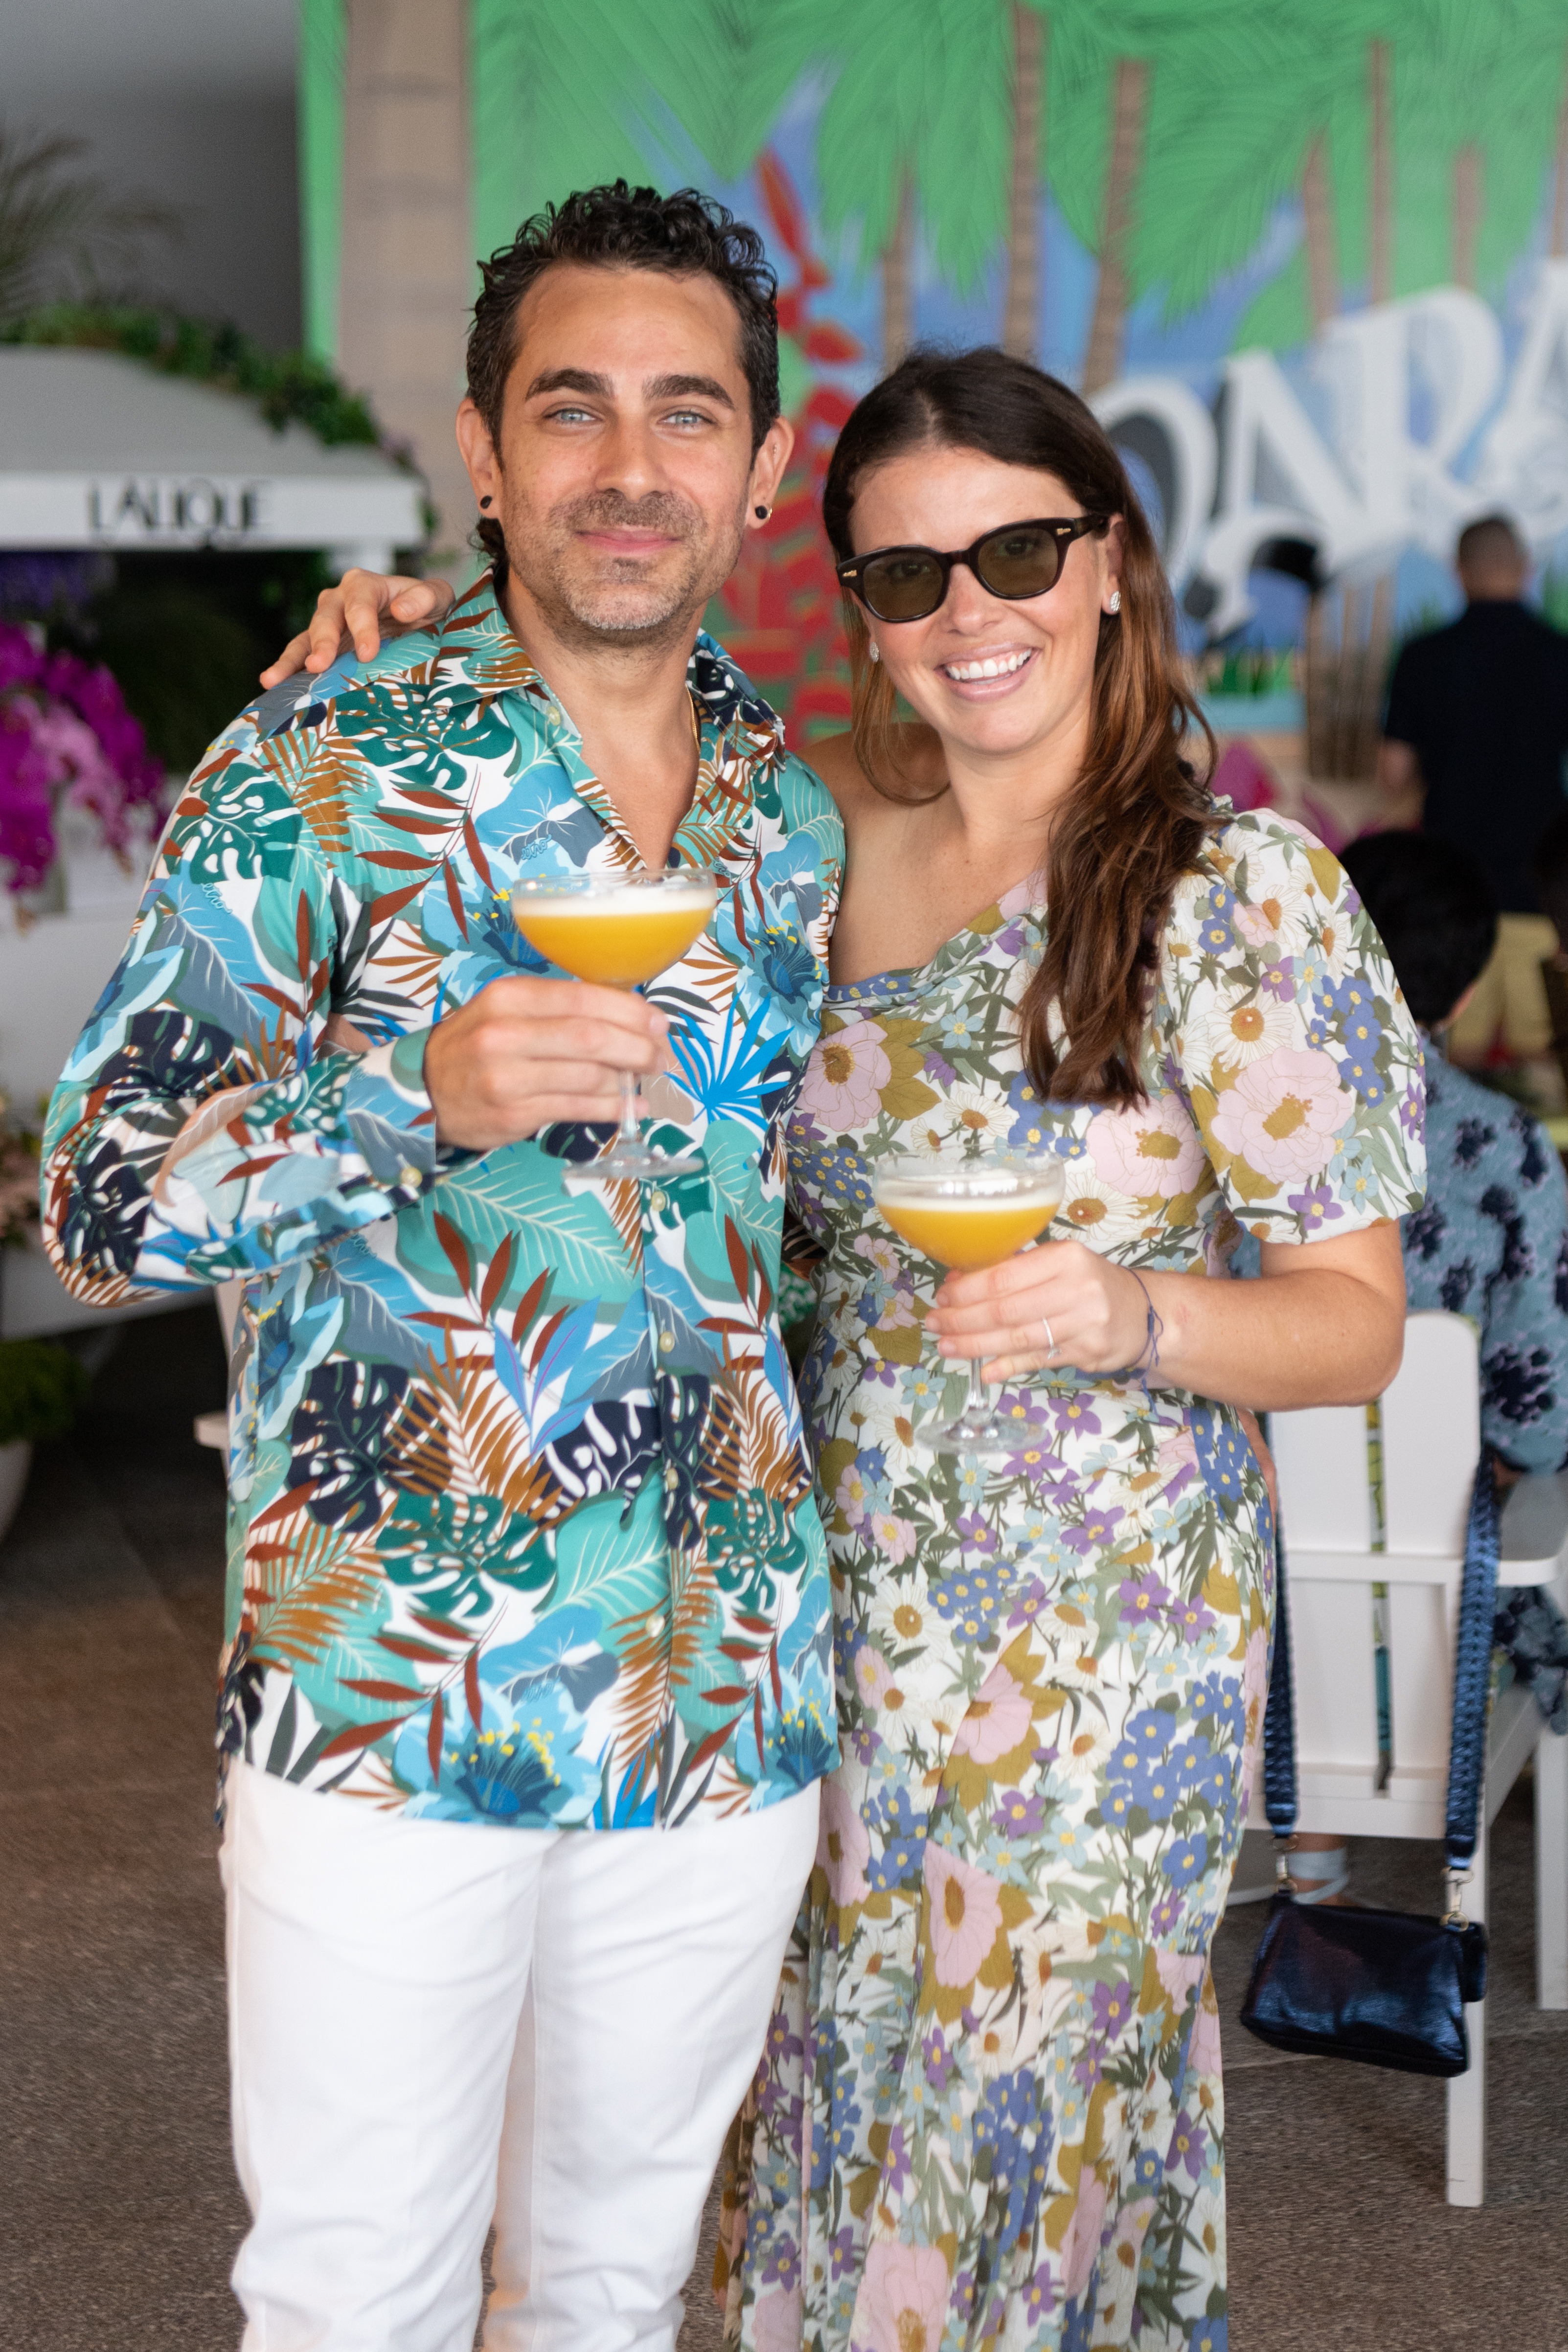 Woman and man smiling for a photo holding cocktails